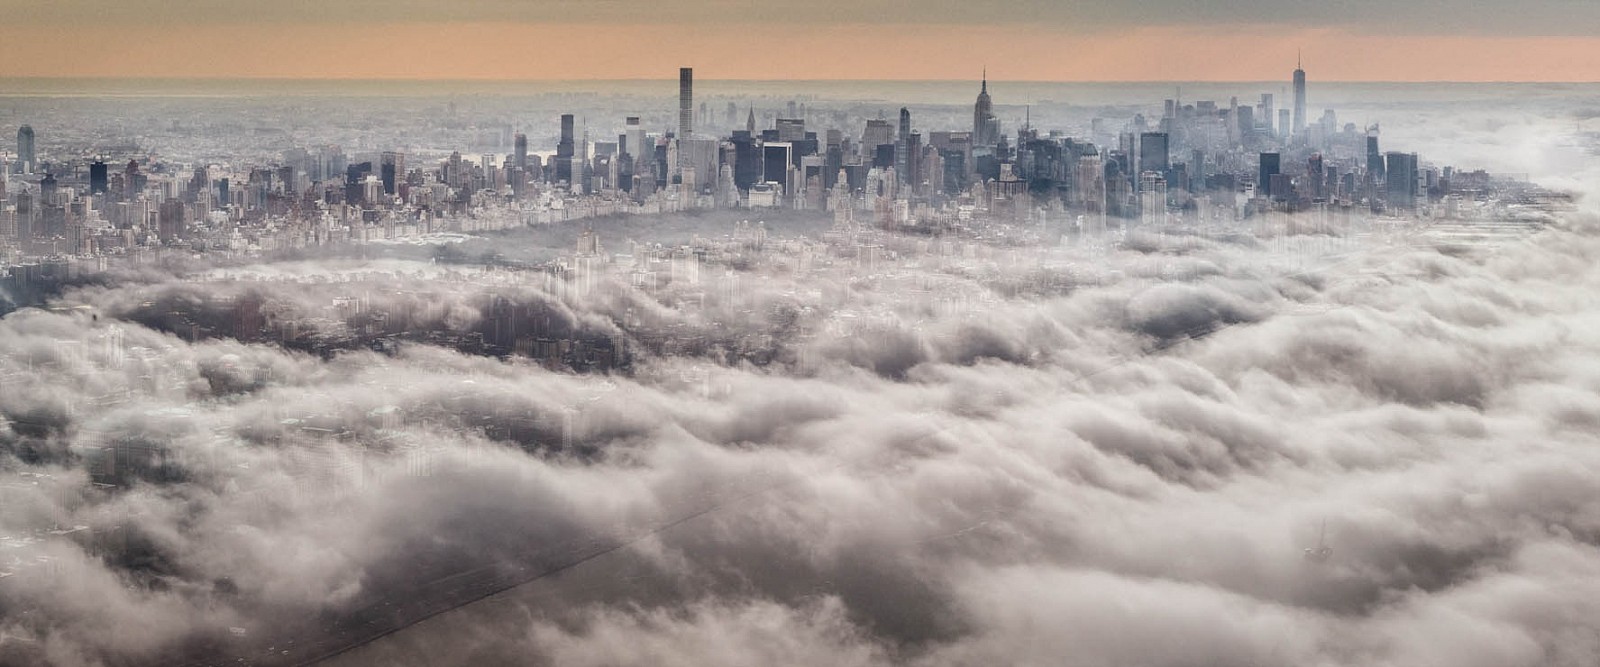 David Drebin, Above the Clouds, 2016
Digital C Print, 30 x 72 inches Also available in 20 x 48 inches and 40 x 96 inches